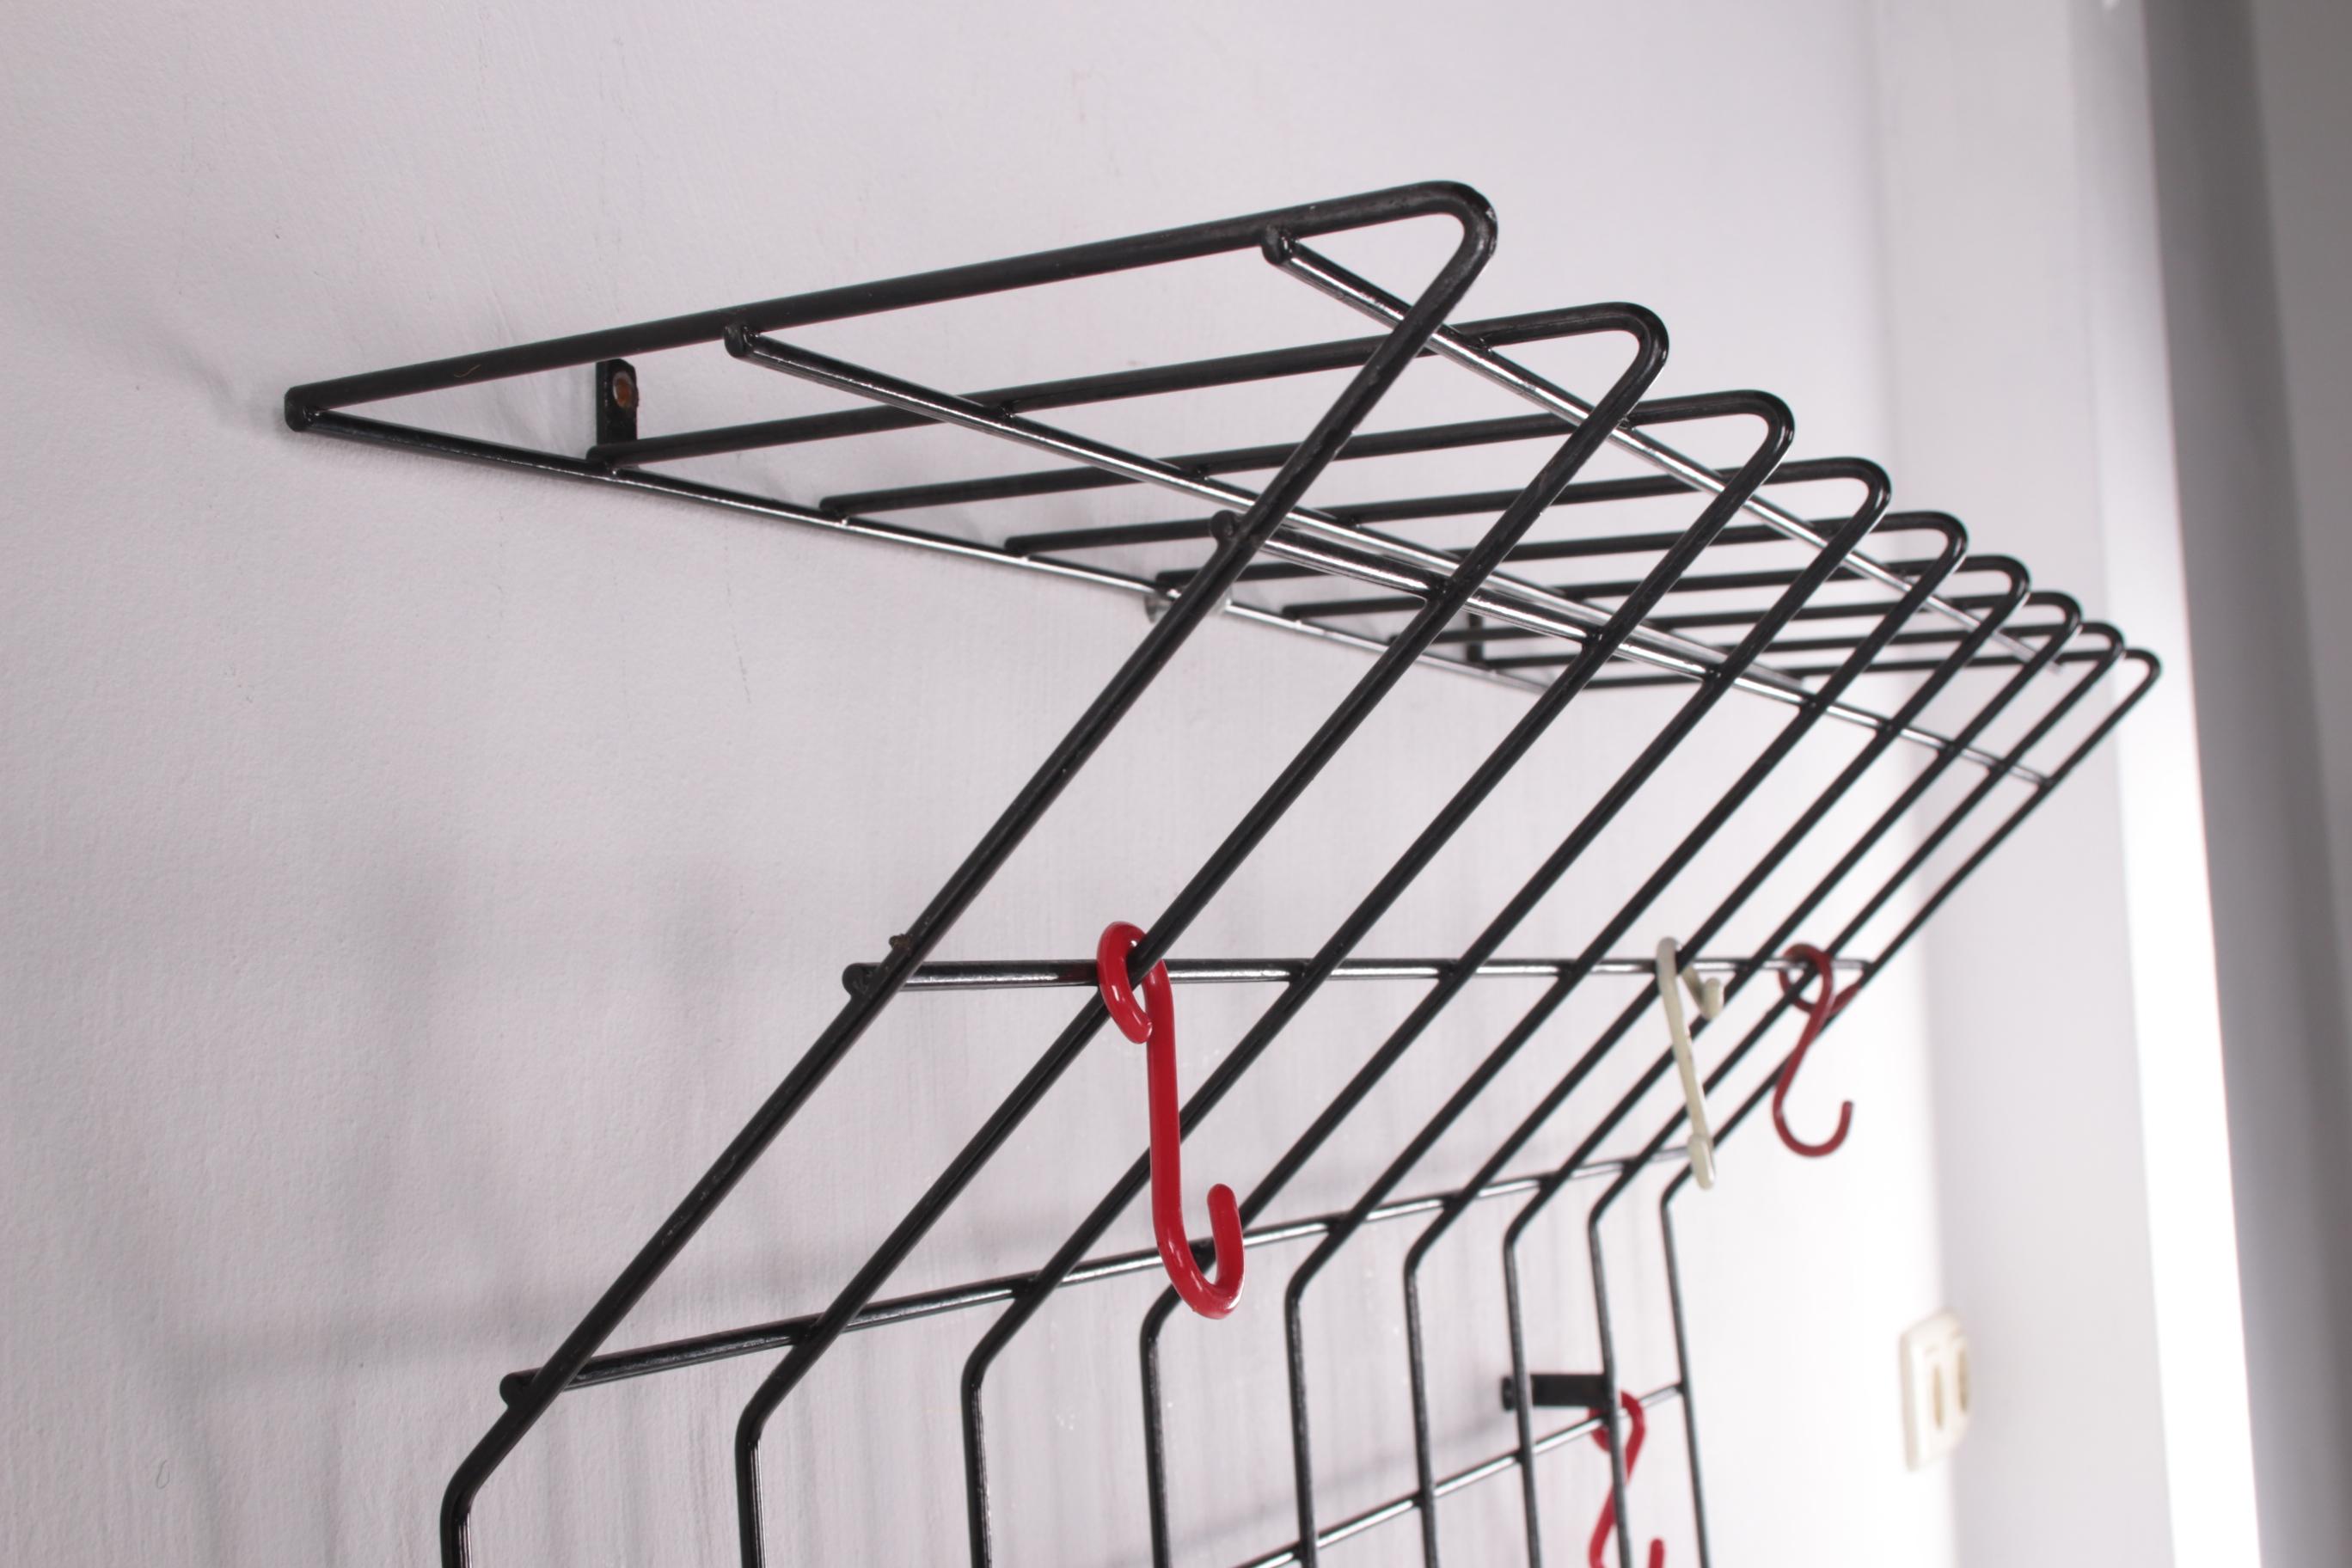 Mid-20th Century Vintage Wall Coat Rack Design by Karl Fichtel 1950s, Germany For Sale